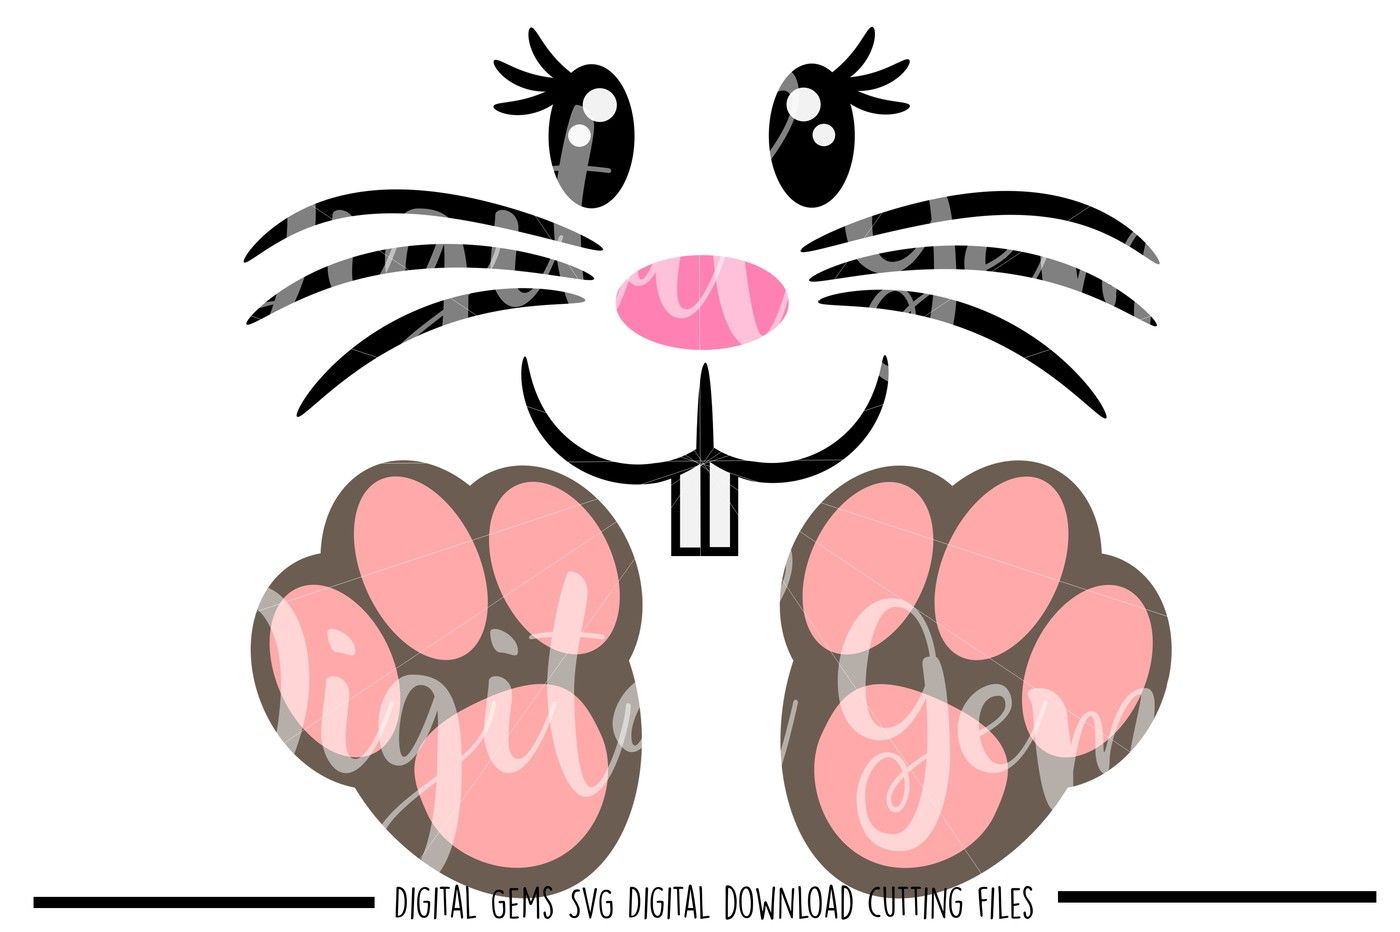 Easter Bunny Face / Feet SVG / DXF / EPS / PNG Files By Digital Gems